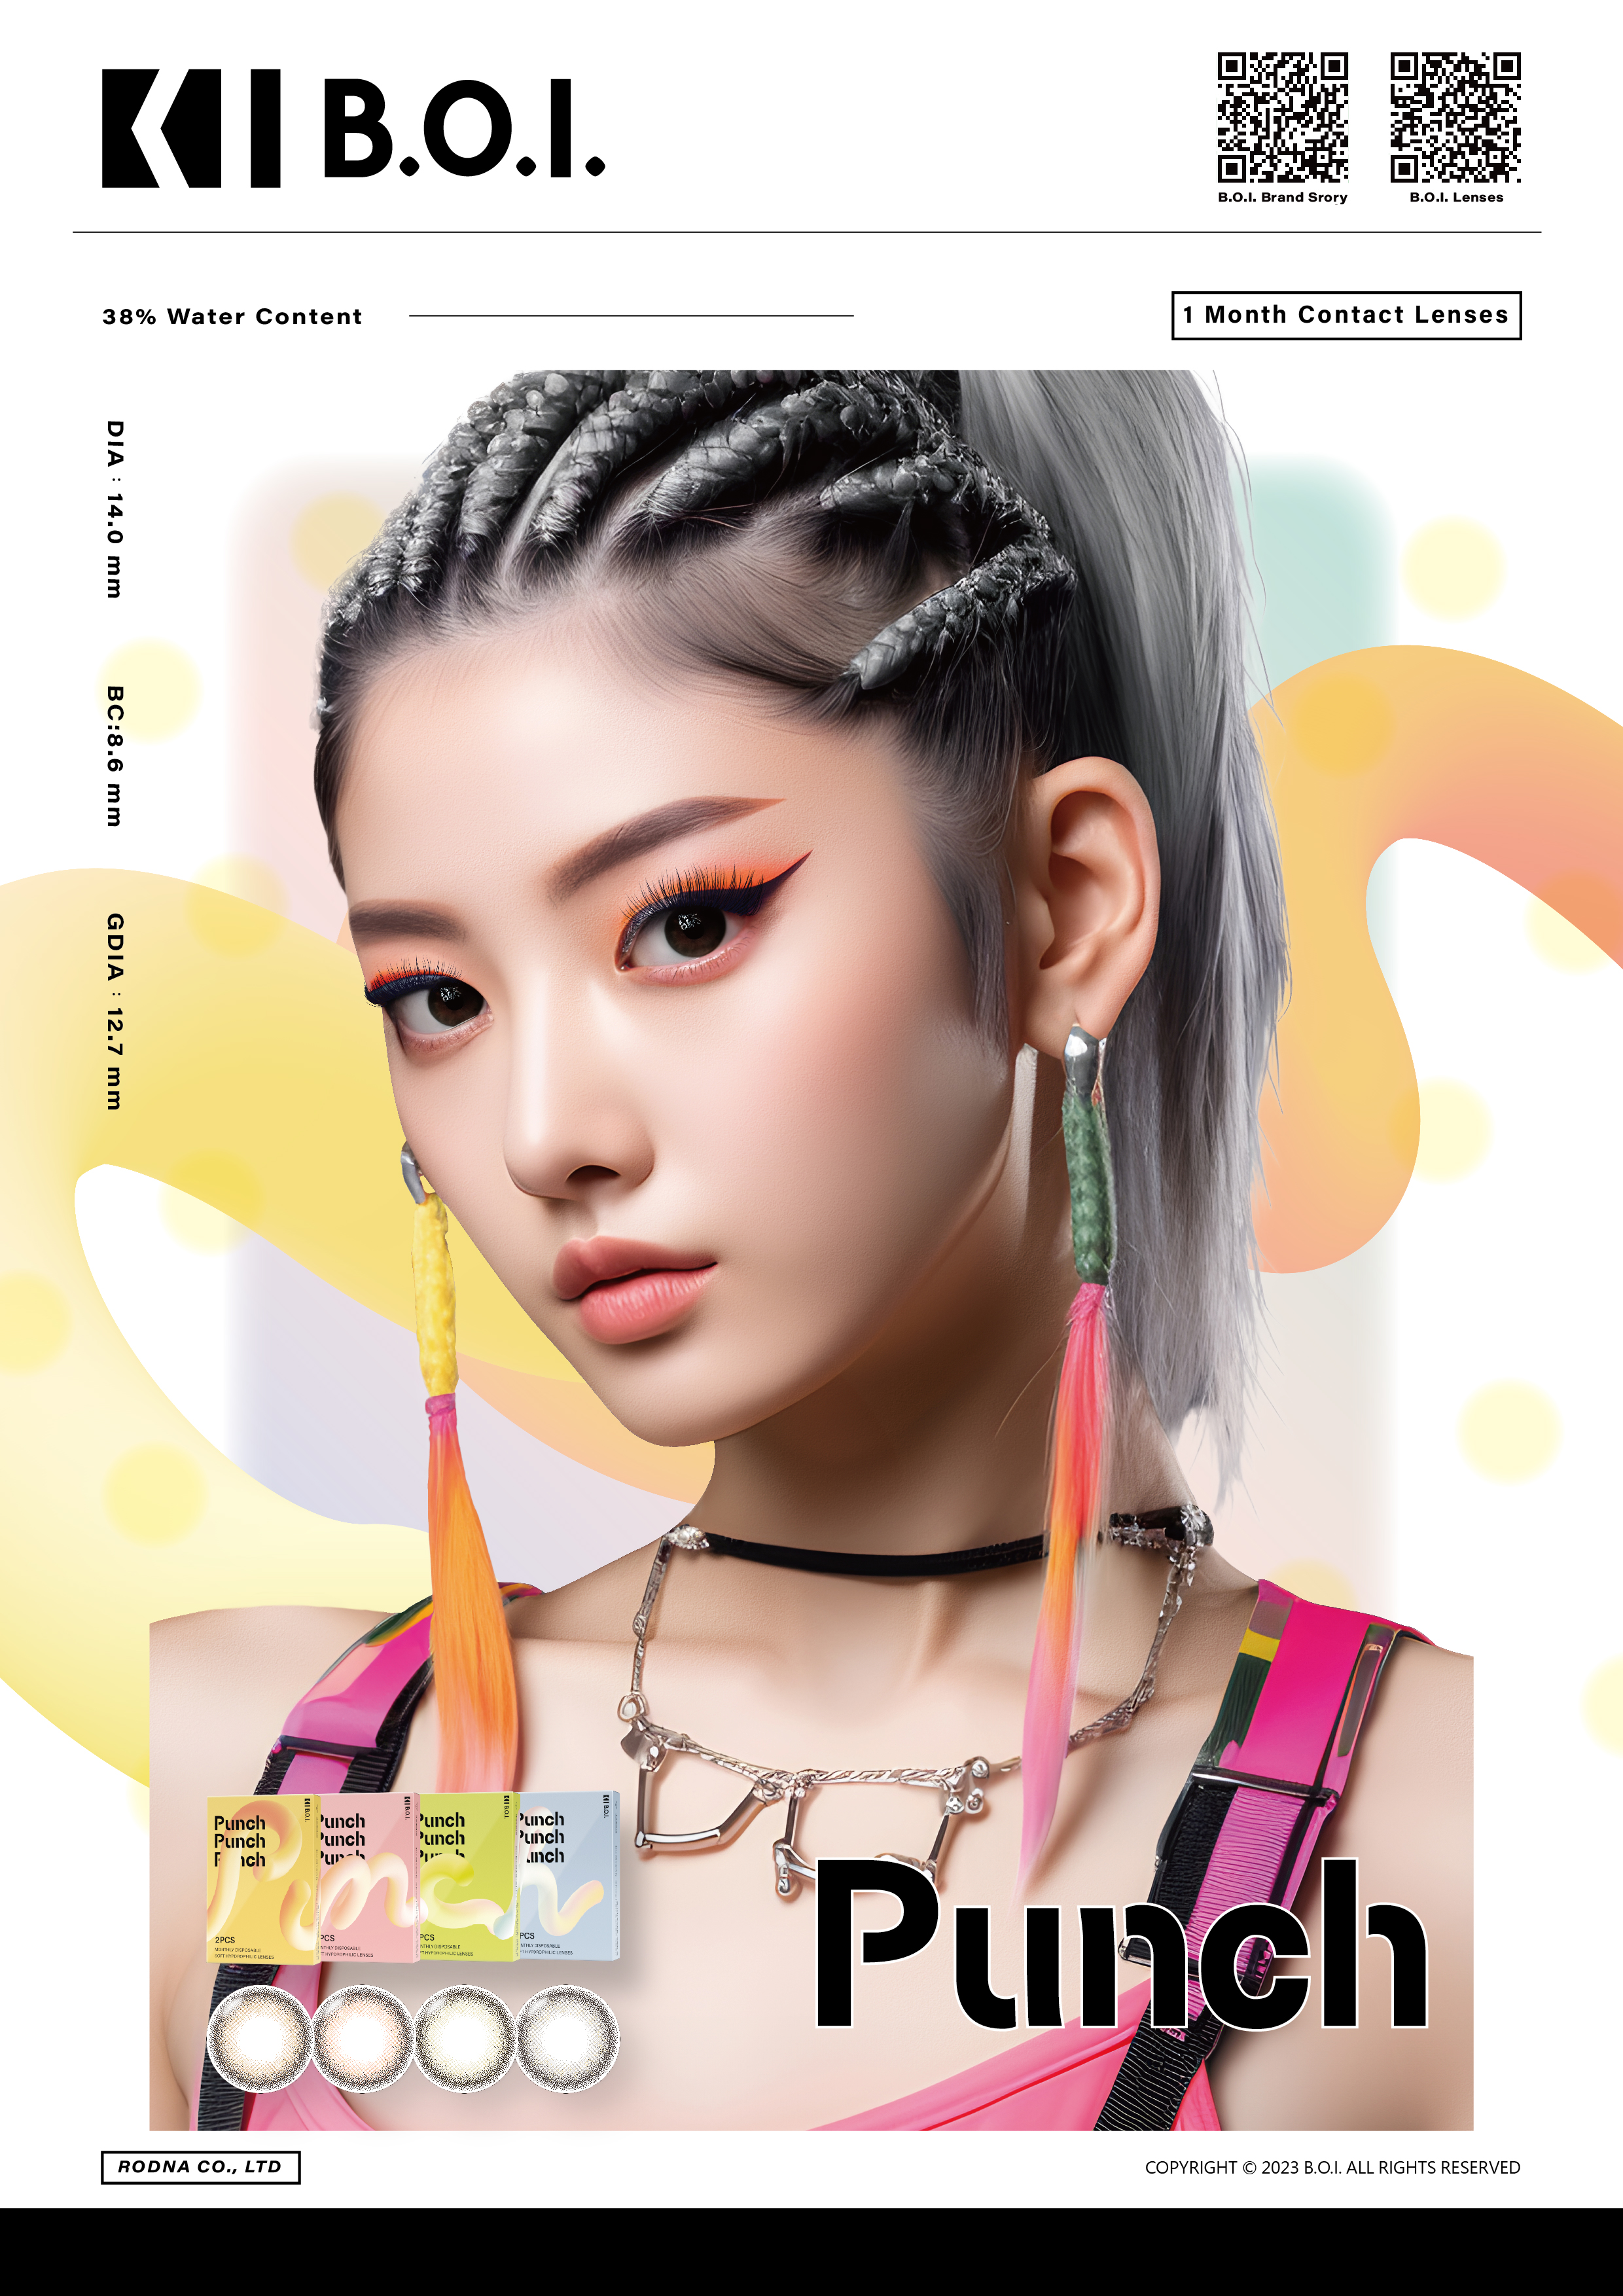 BOI KR Punch color contact lenses model-韓系隱形眼鏡-Punch系列彩片模特